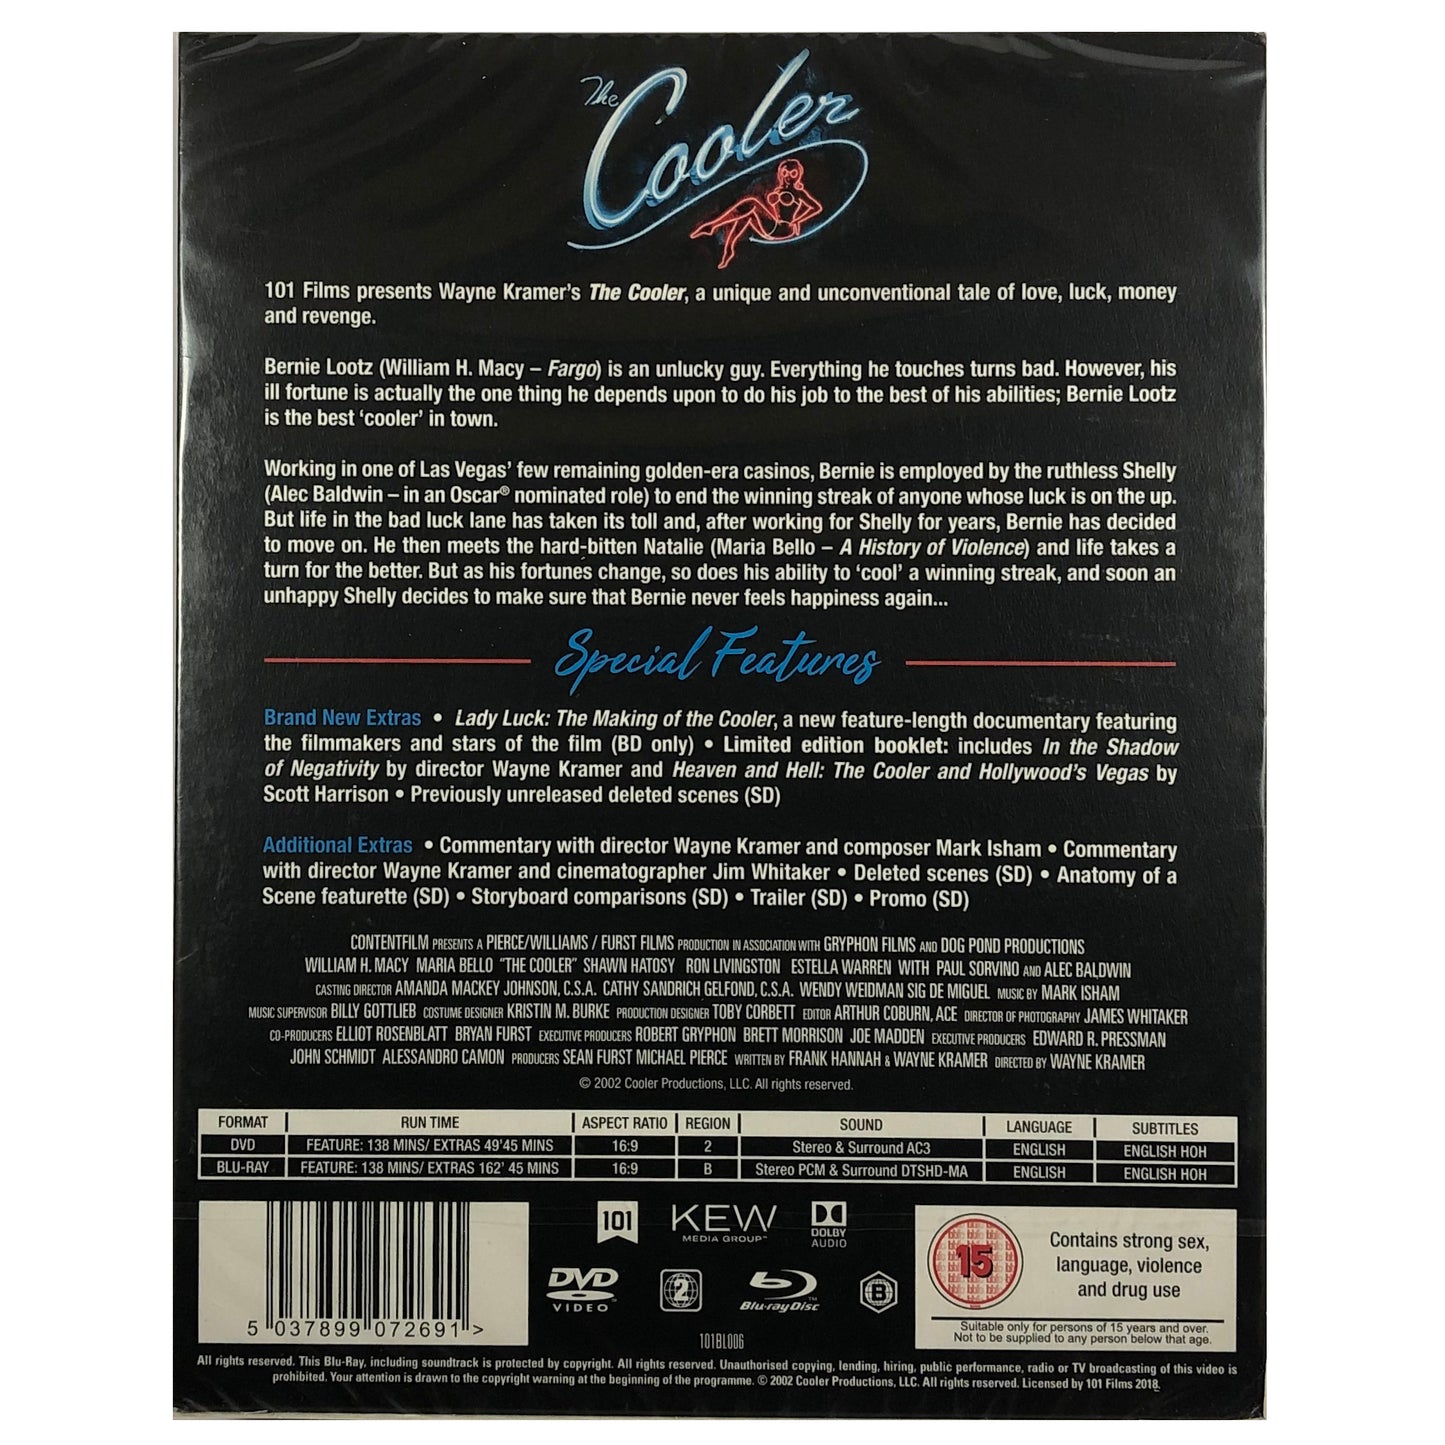 The Cooler - 101 Films Edition Blu-Ray